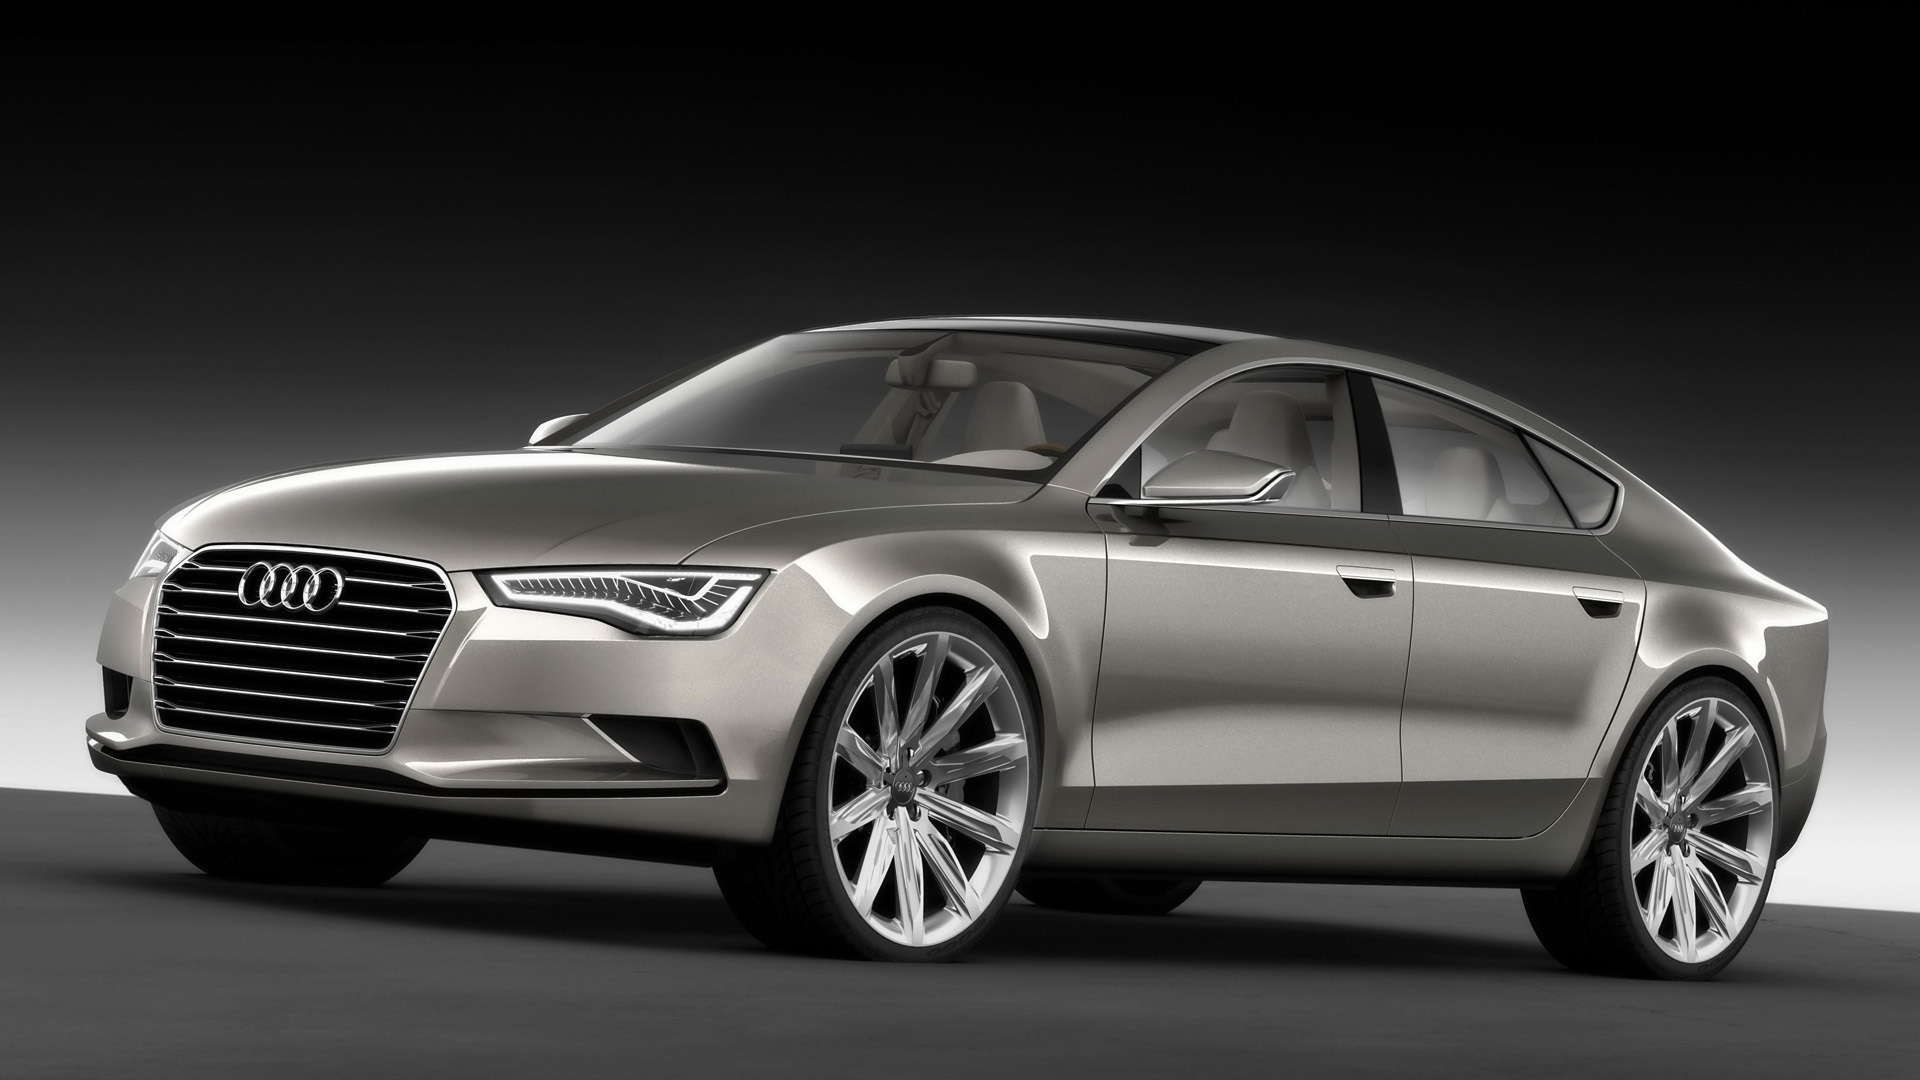 2009 Audi Sportback Concept - Front And Side for 1920 x 1080 HDTV 1080p resolution